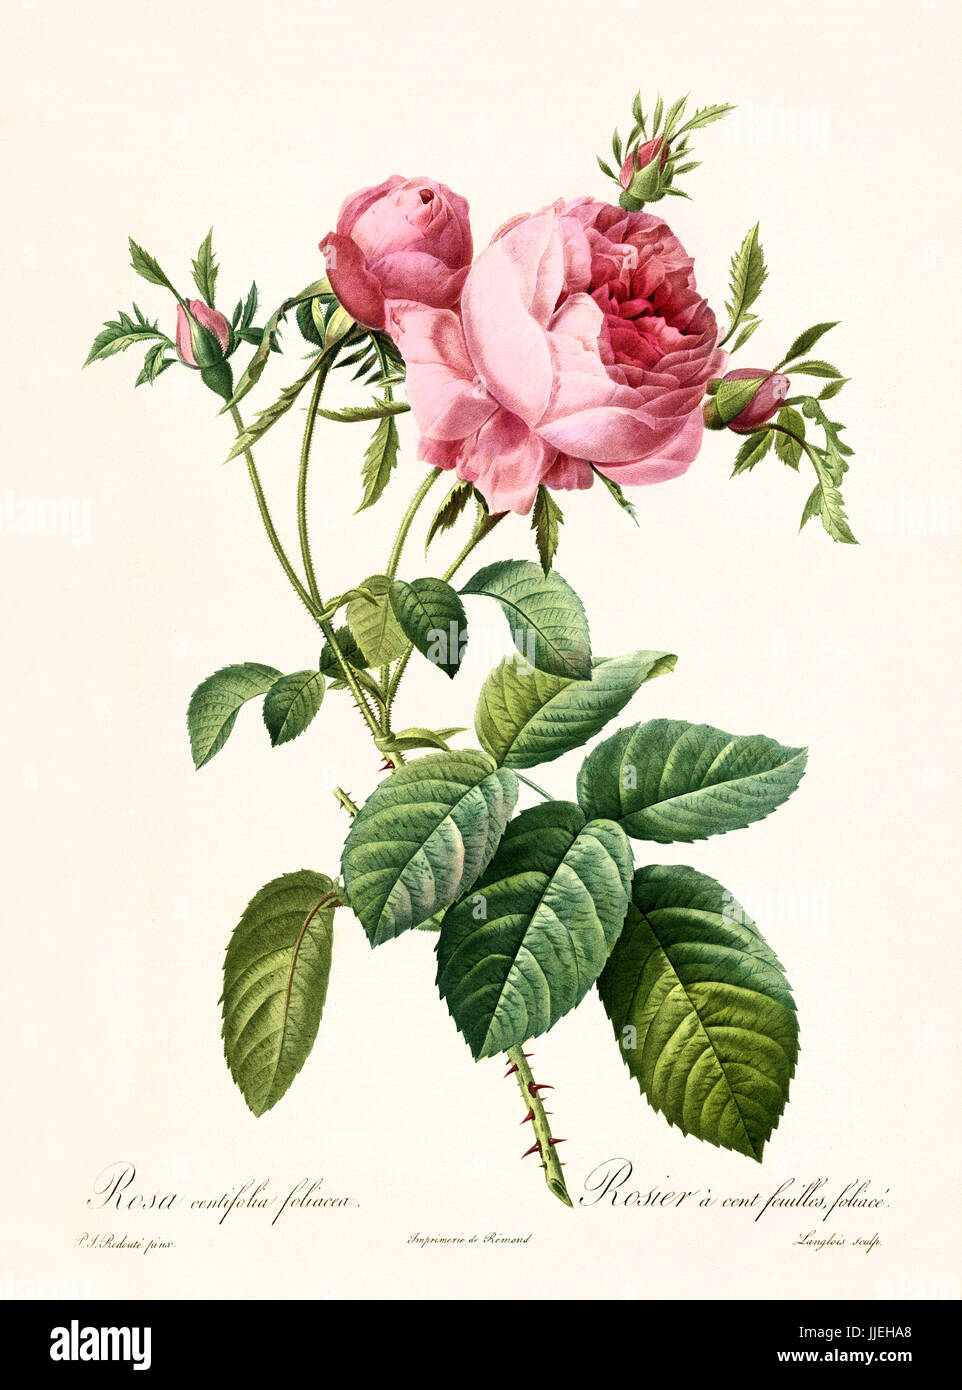 Old illustration of Rosa centifolia foliacea. Created by P. R. Redoute, published on Les Roses, Imp. Firmin Didot, Paris, 1817-24 Stock Photo